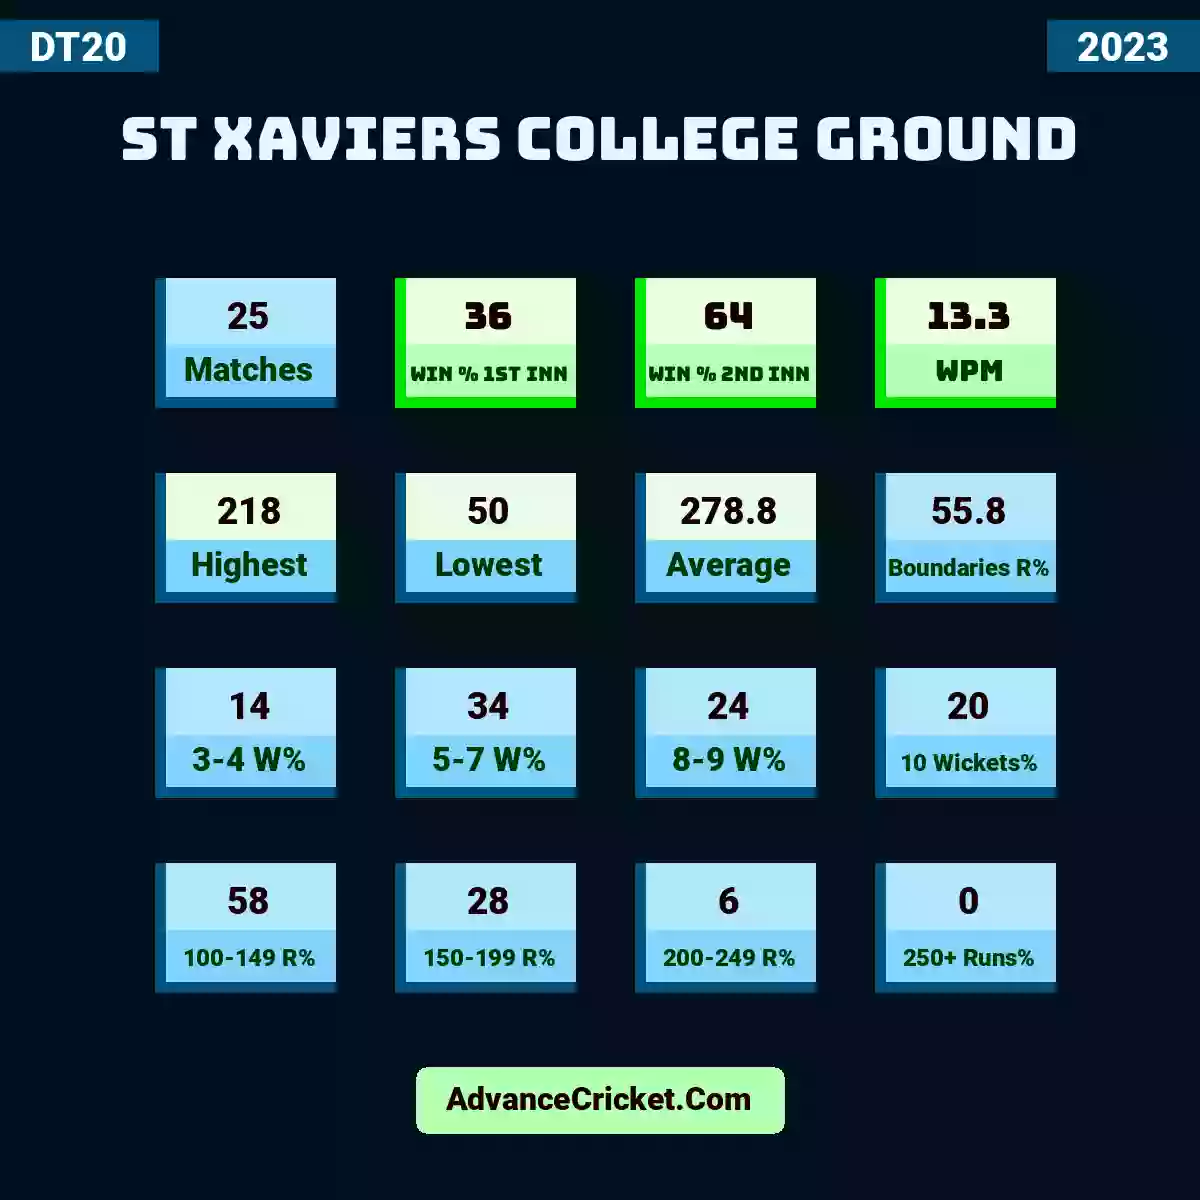 Image showing St Xaviers College Ground with Matches: 25, Win % 1st Inn: 36, Win % 2nd Inn: 64, WPM: 13.3, Highest: 218, Lowest: 50, Average: 278.8, Boundaries R%: 55.8, 3-4 W%: 14, 5-7 W%: 34, 8-9 W%: 24, 10 Wickets%: 20, 100-149 R%: 58, 150-199 R%: 28, 200-249 R%: 6, 250+ Runs%: 0.